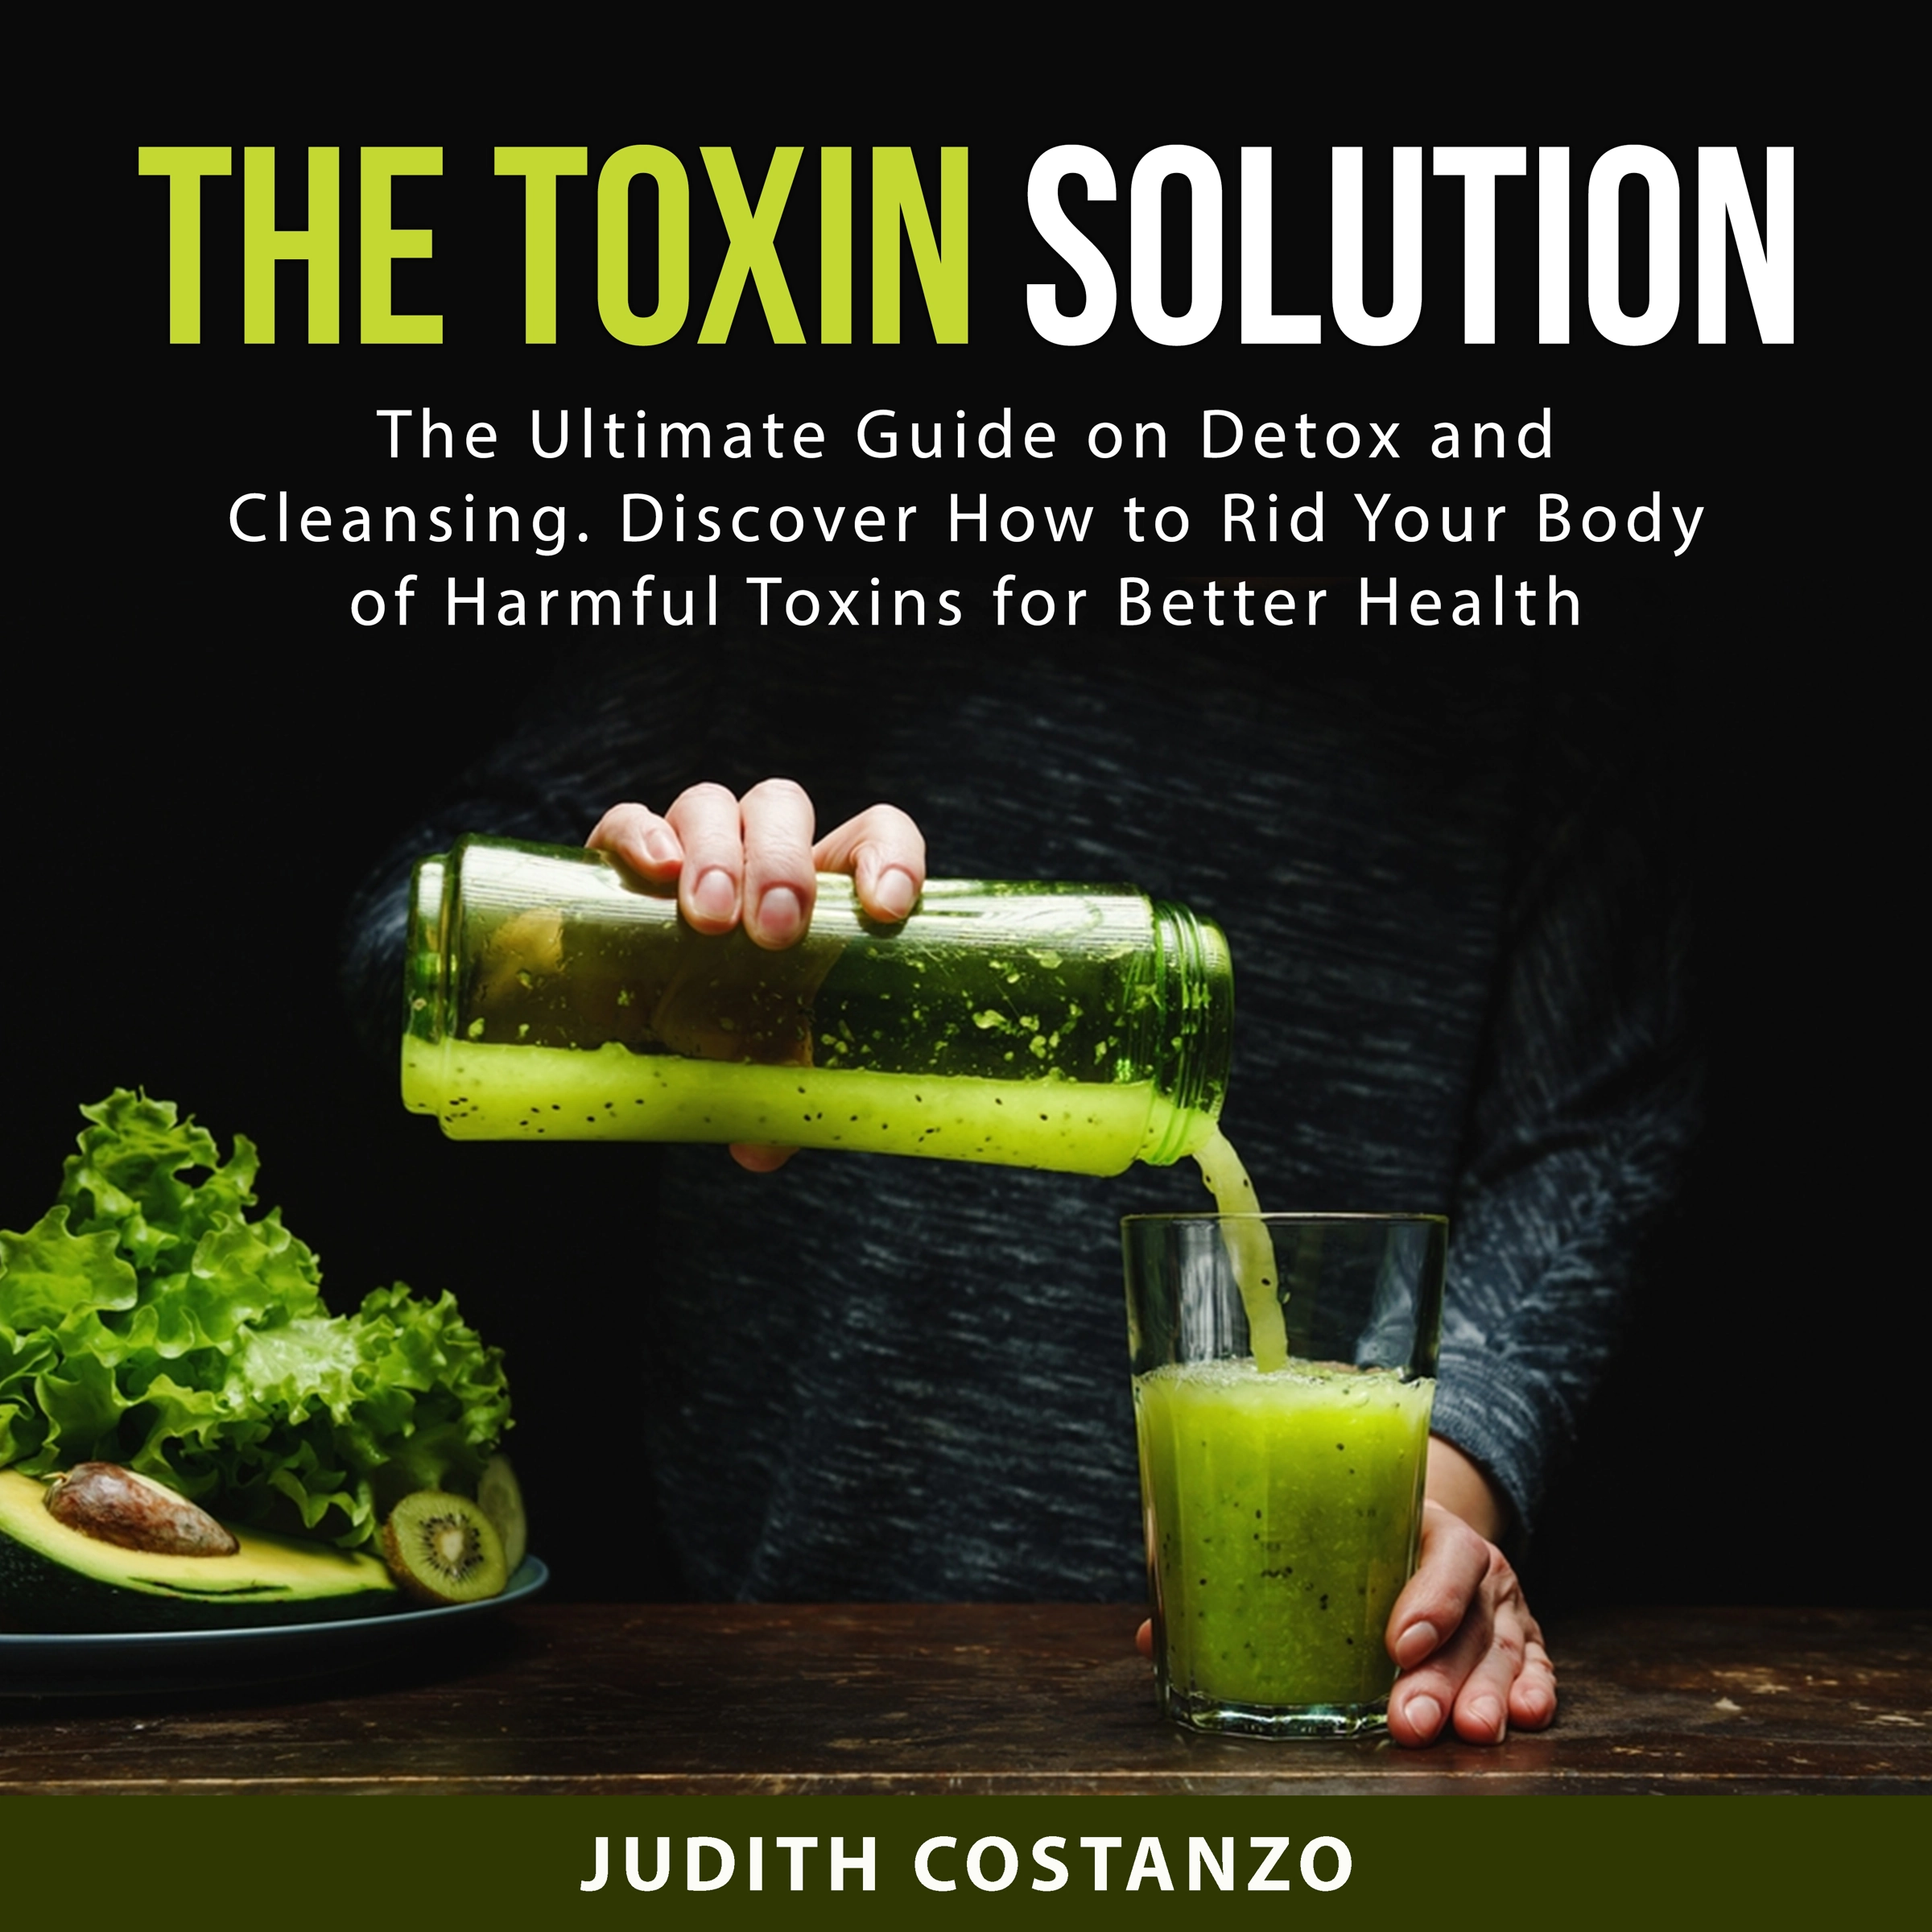 The Toxin Solution Audiobook by Judith  Costanzo